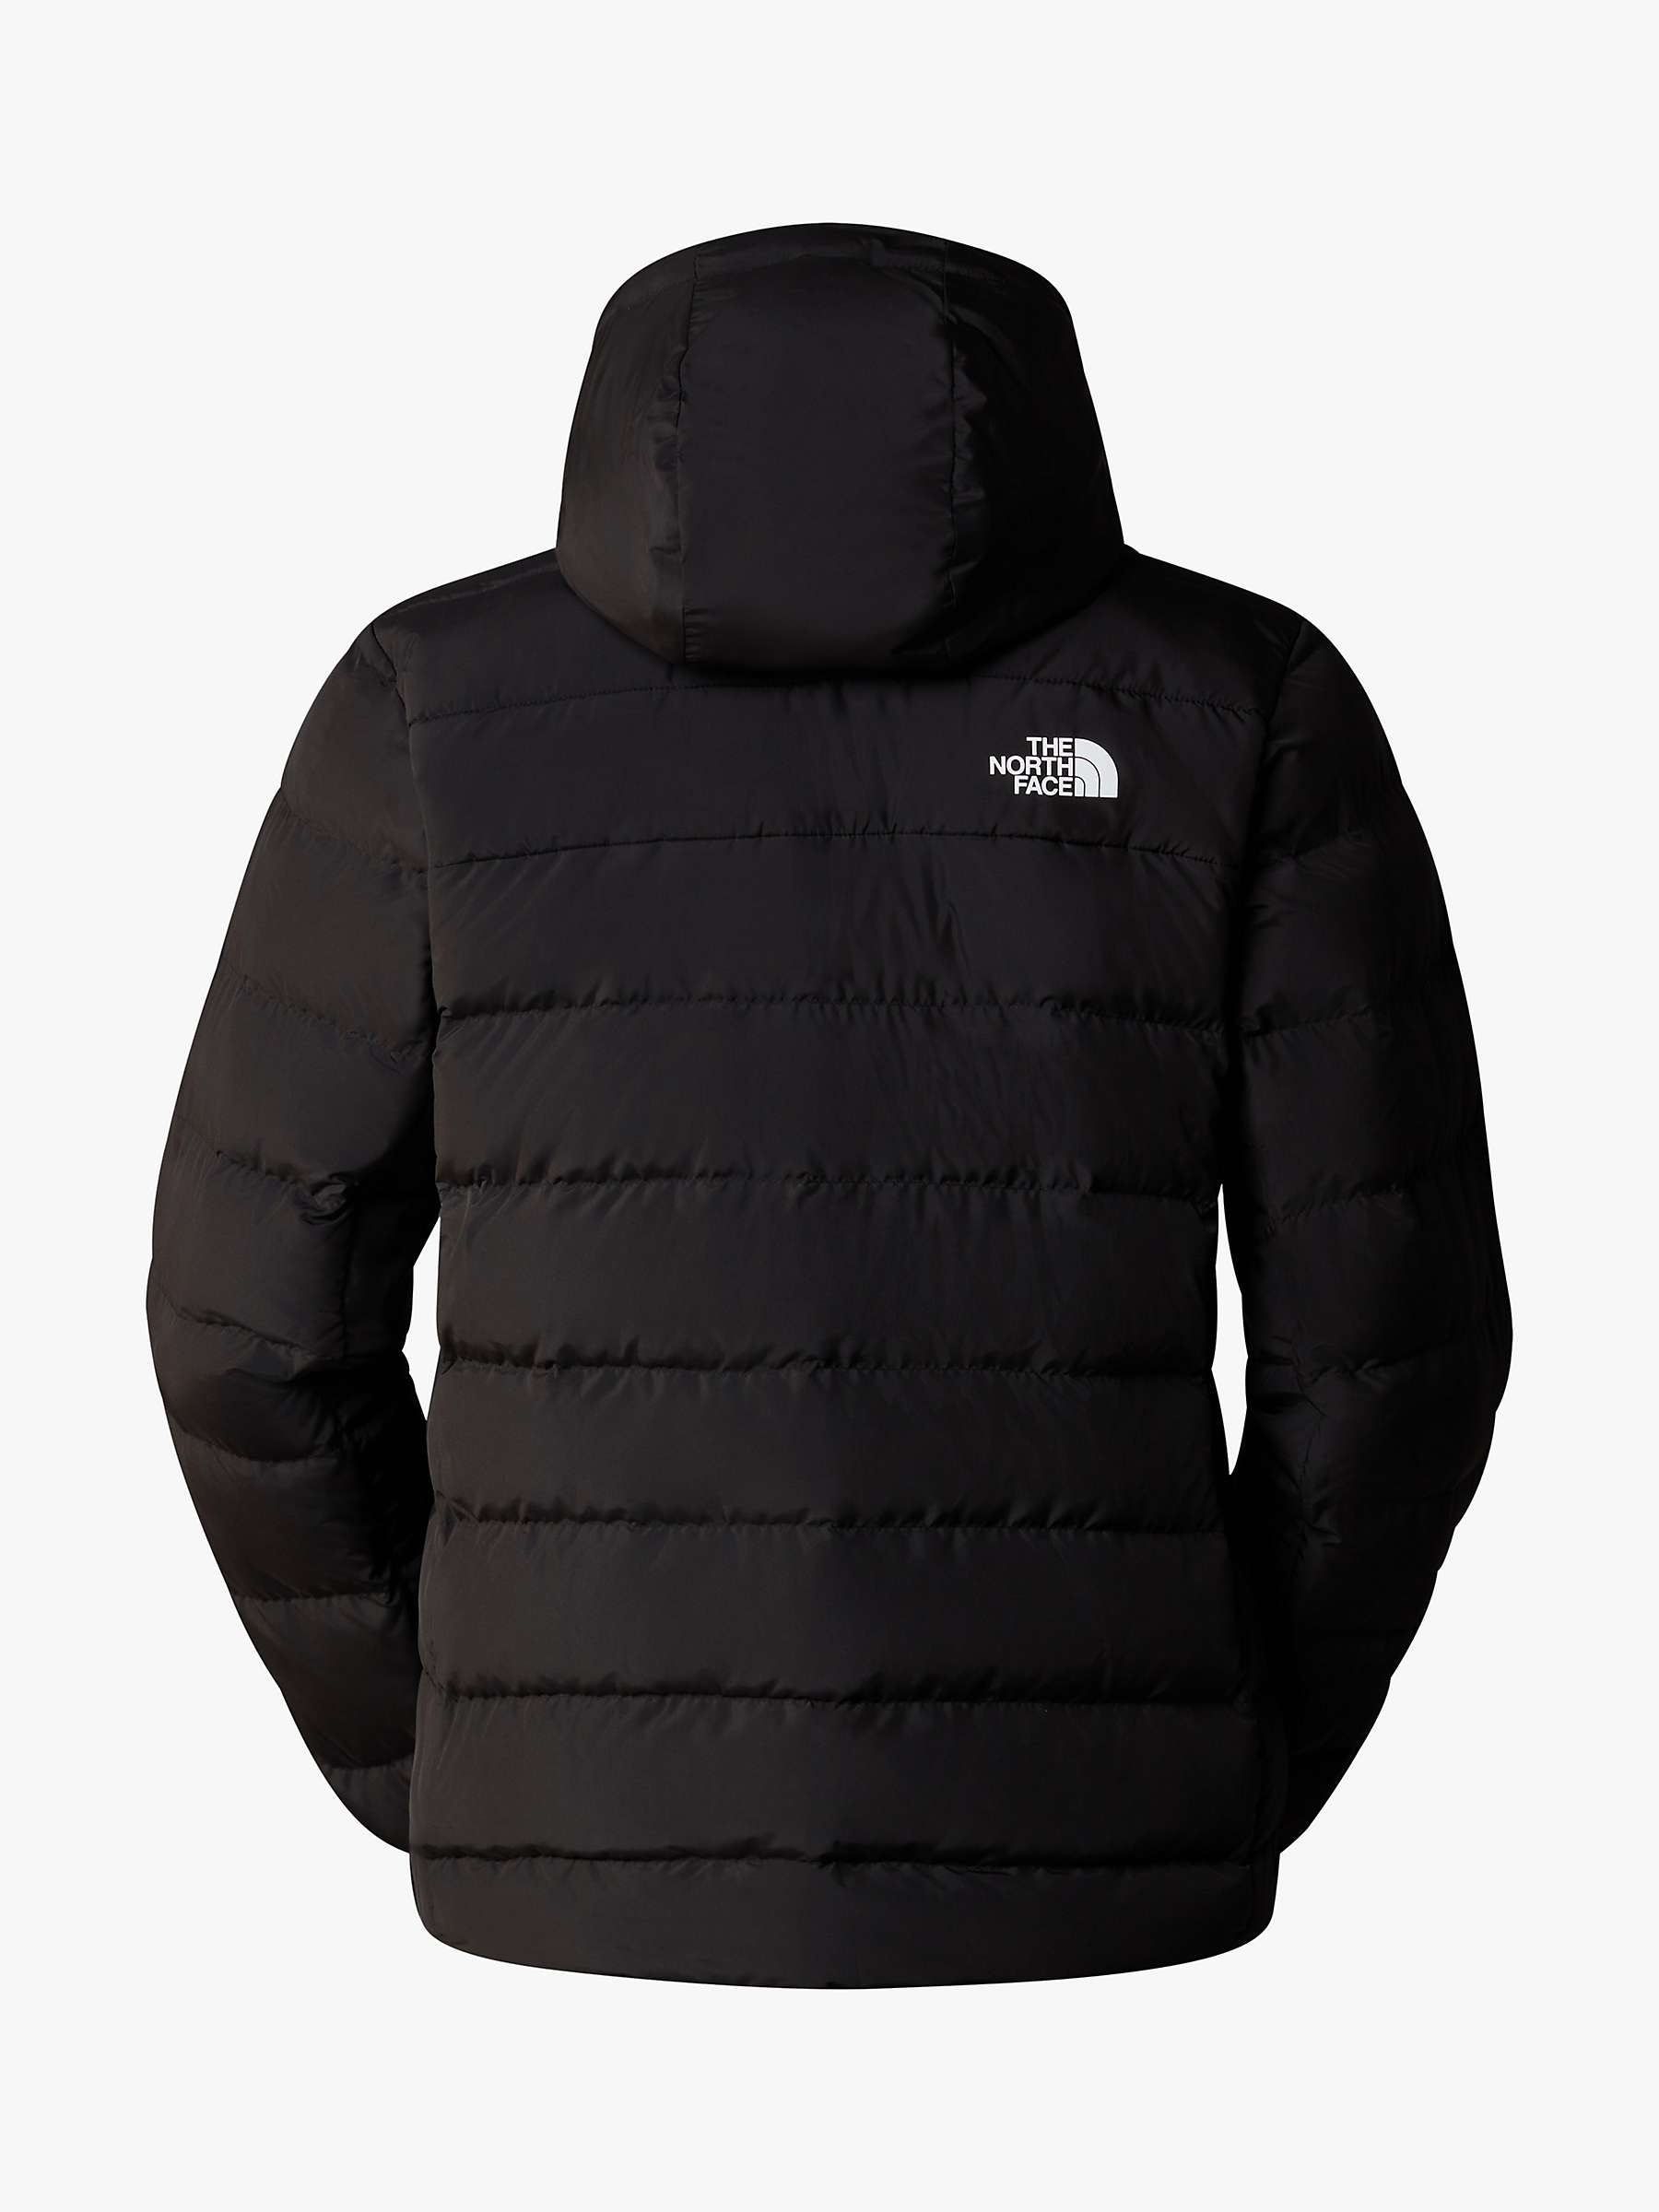 Buy The North Face Aconcagua 3 Men's Down Jacket Online at johnlewis.com